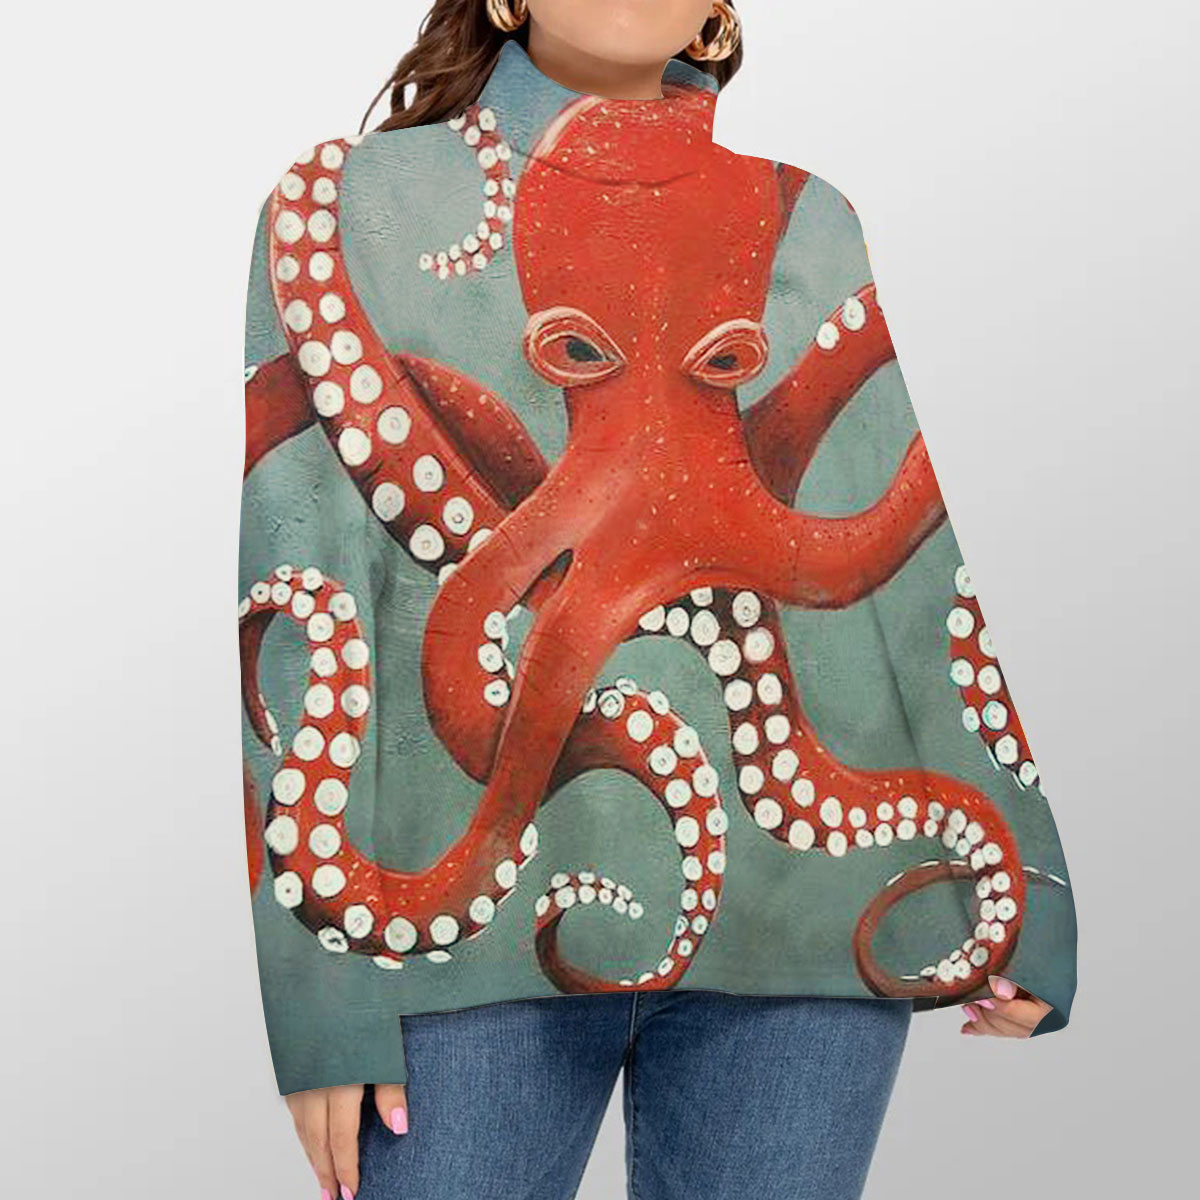 Giant Red Octopus Turtleneck Sweater